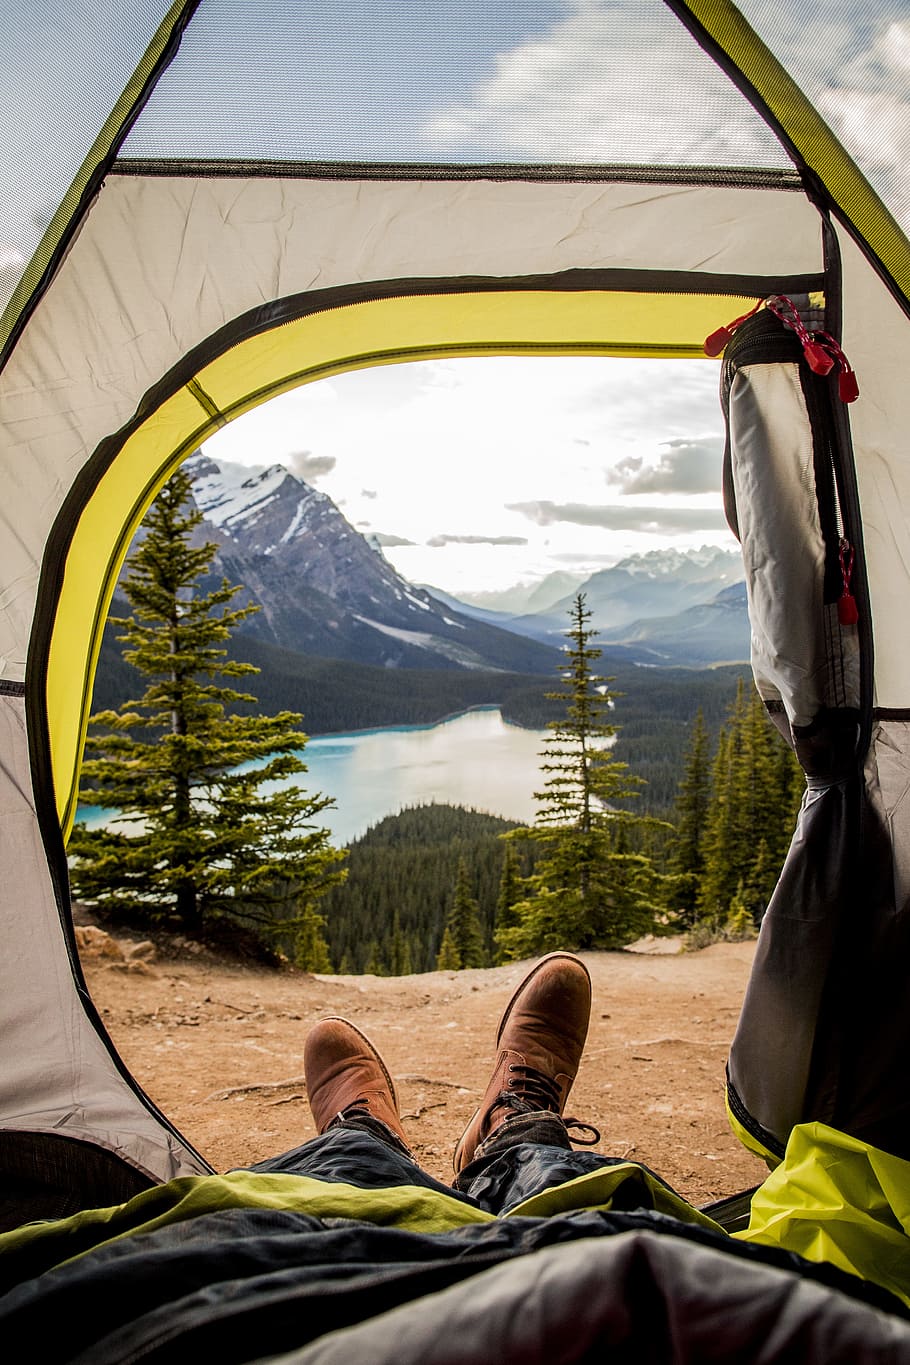 camping, tent, outdoors, travel, hiker, lake, nature, landscape